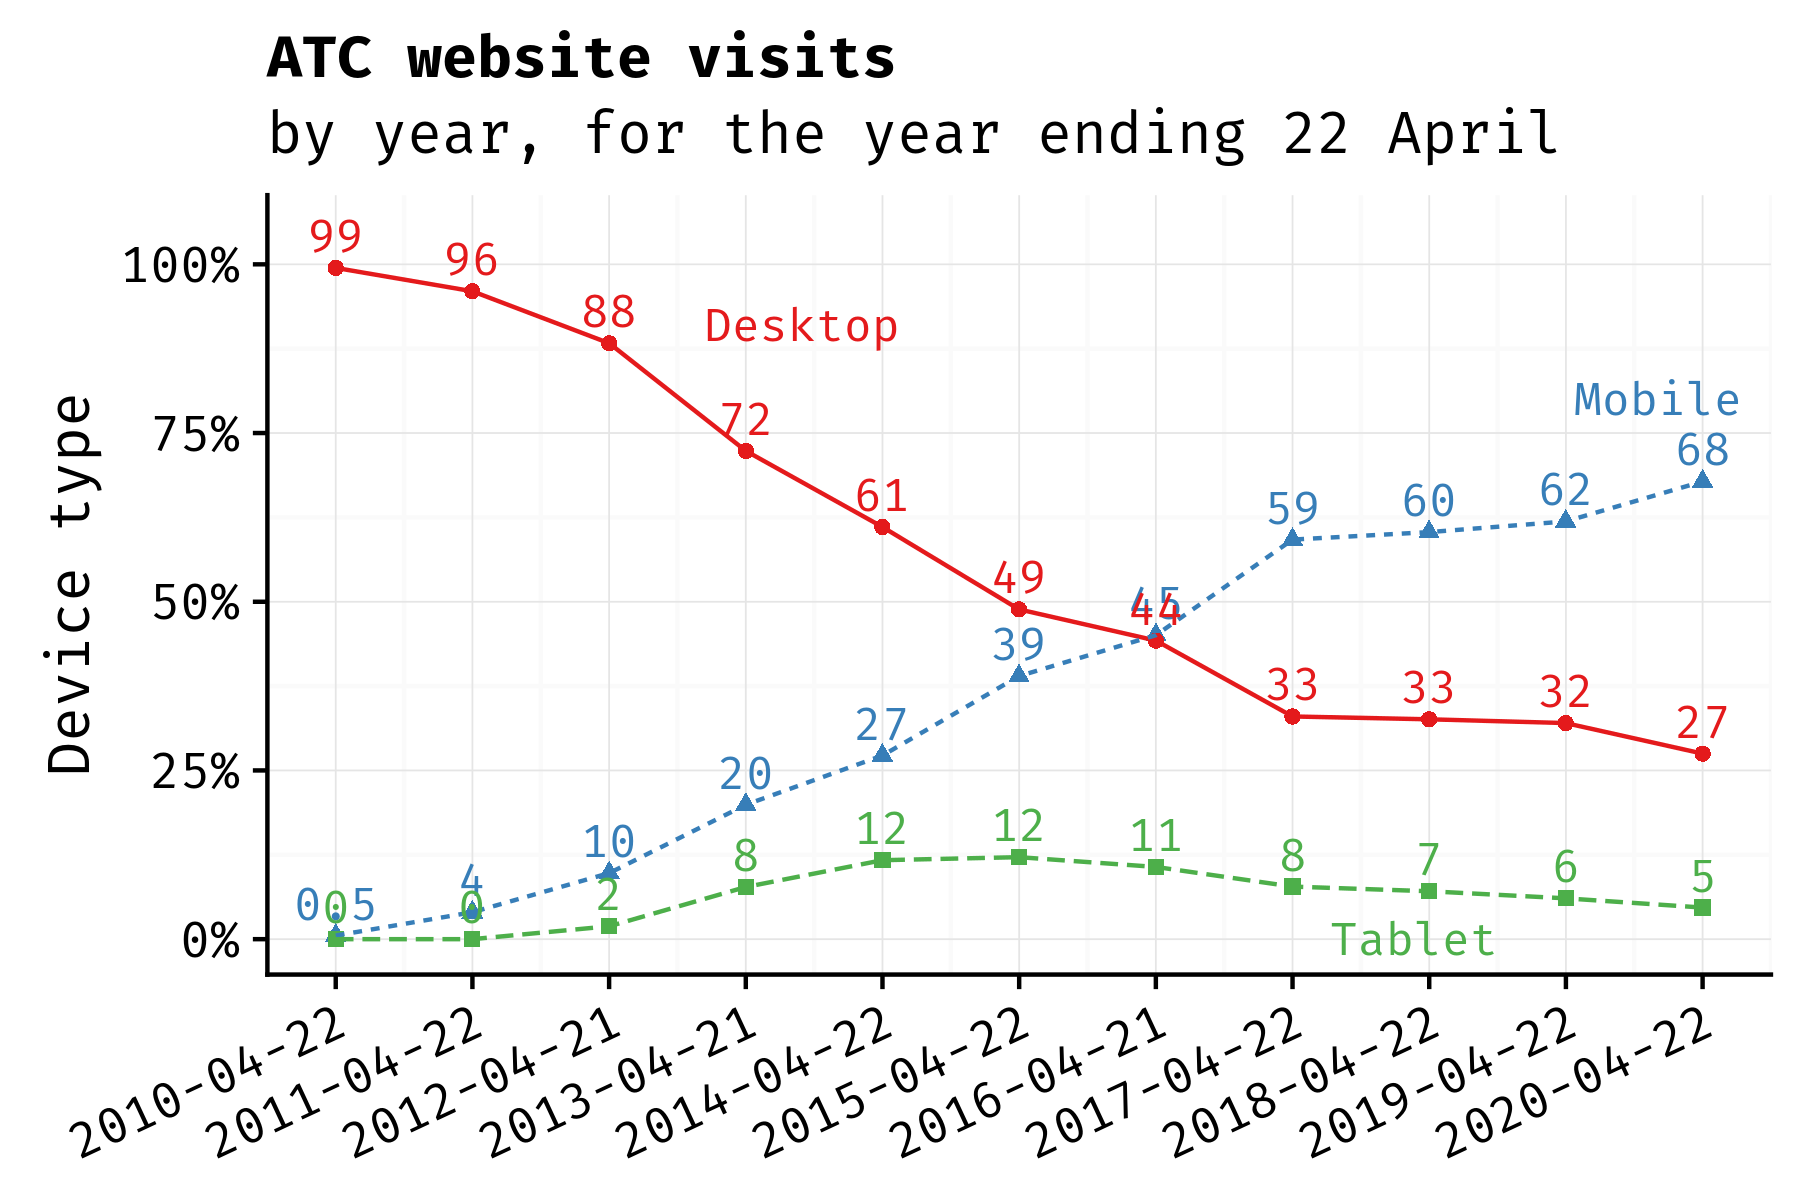 plot of percentage of visitors to ATC sites by Desktop, mobile, or tablet